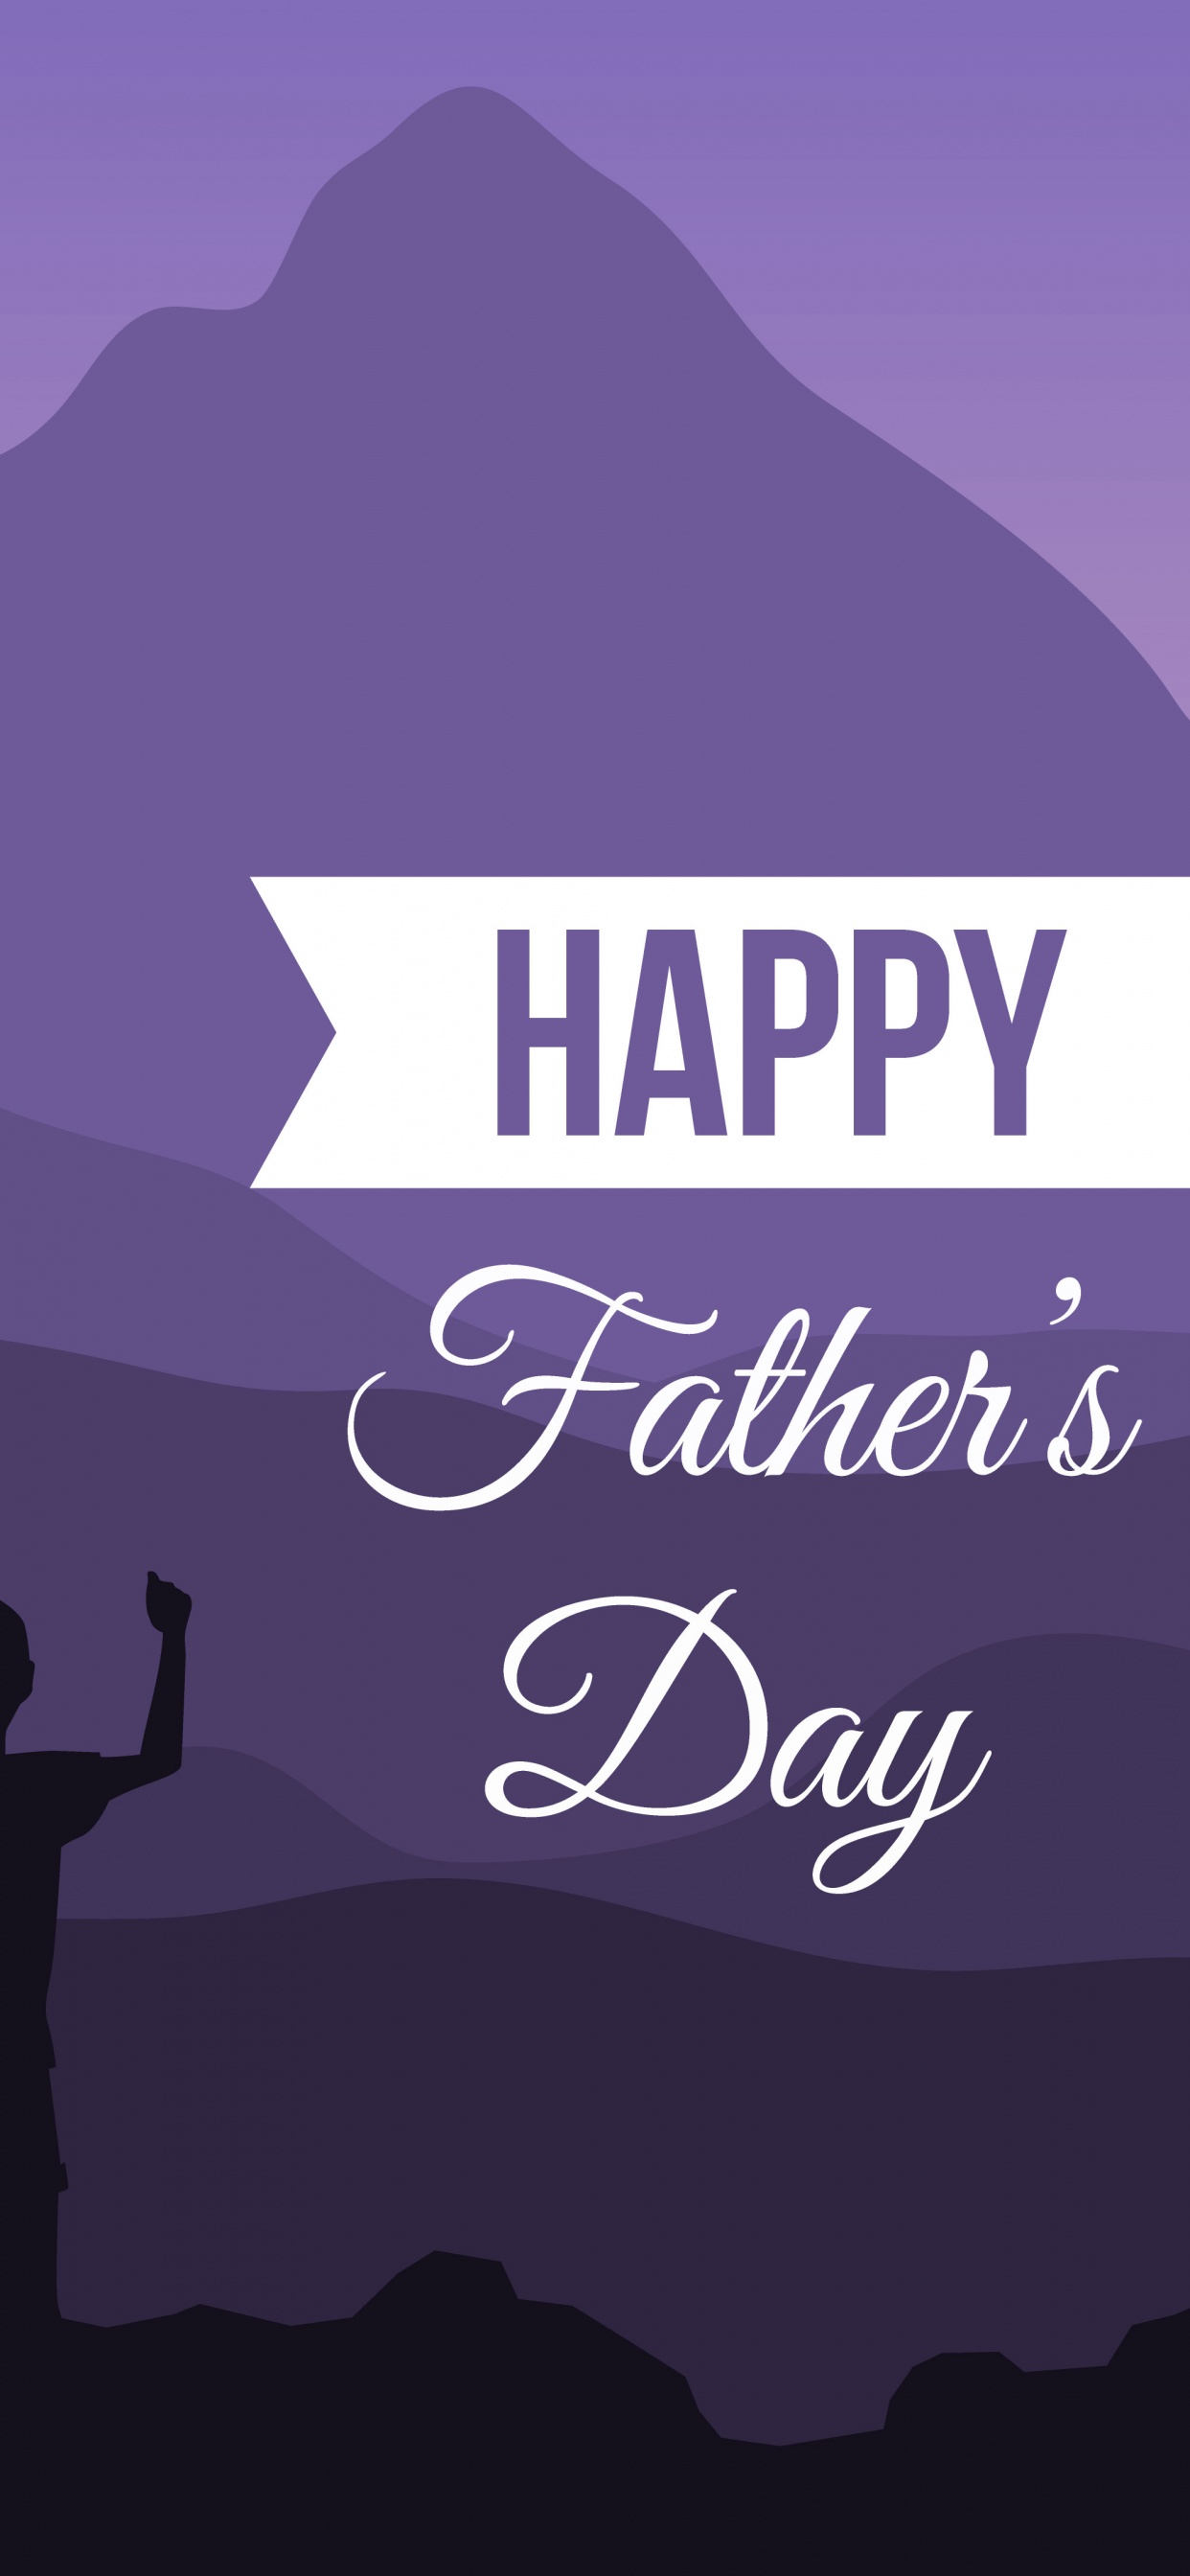 Happy Fathers Day 2020 HD Wallpapers Quotes Images  Best Wishes